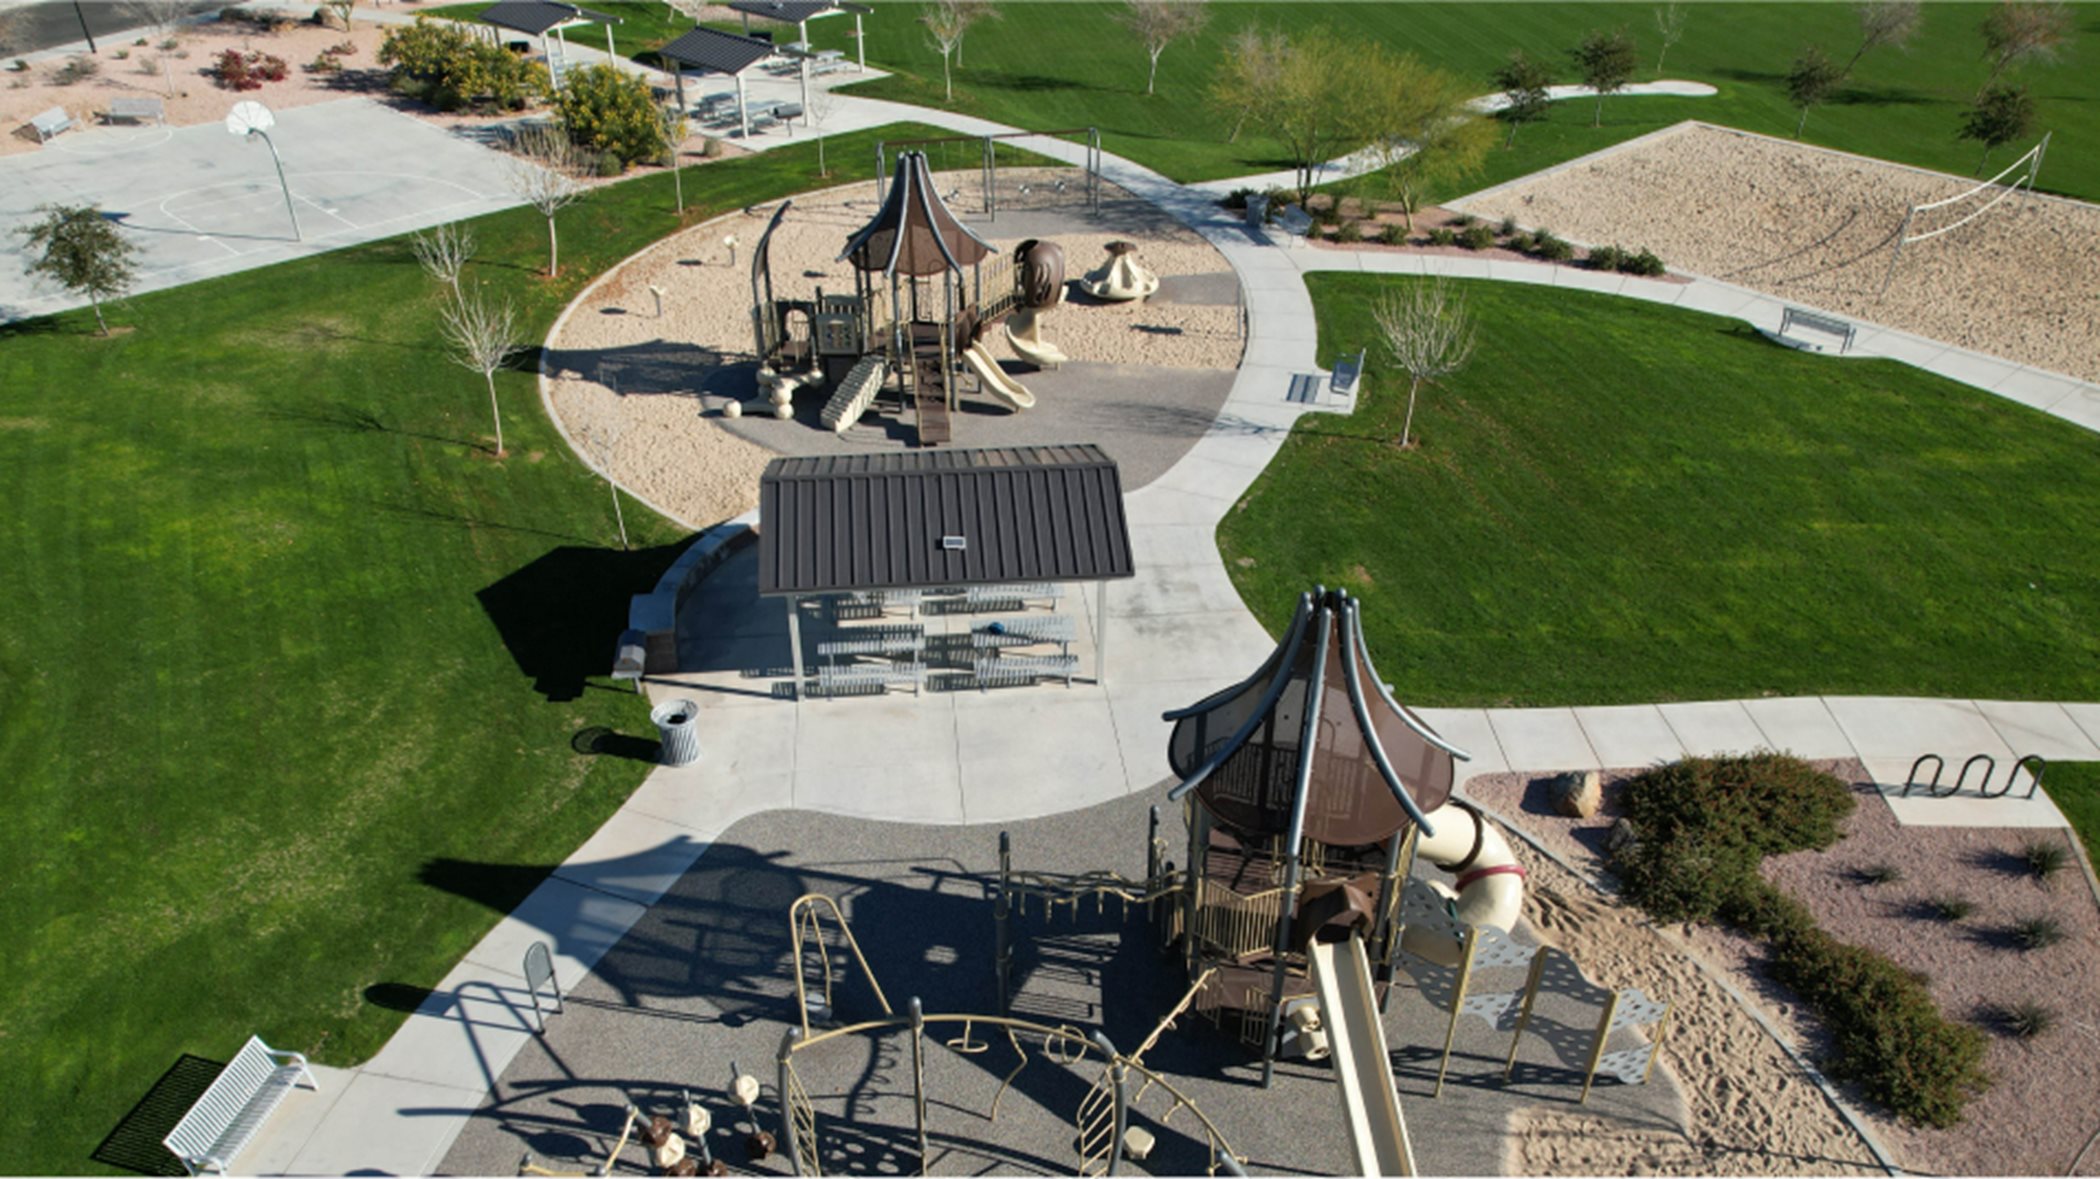 Playground at the park from a different angle